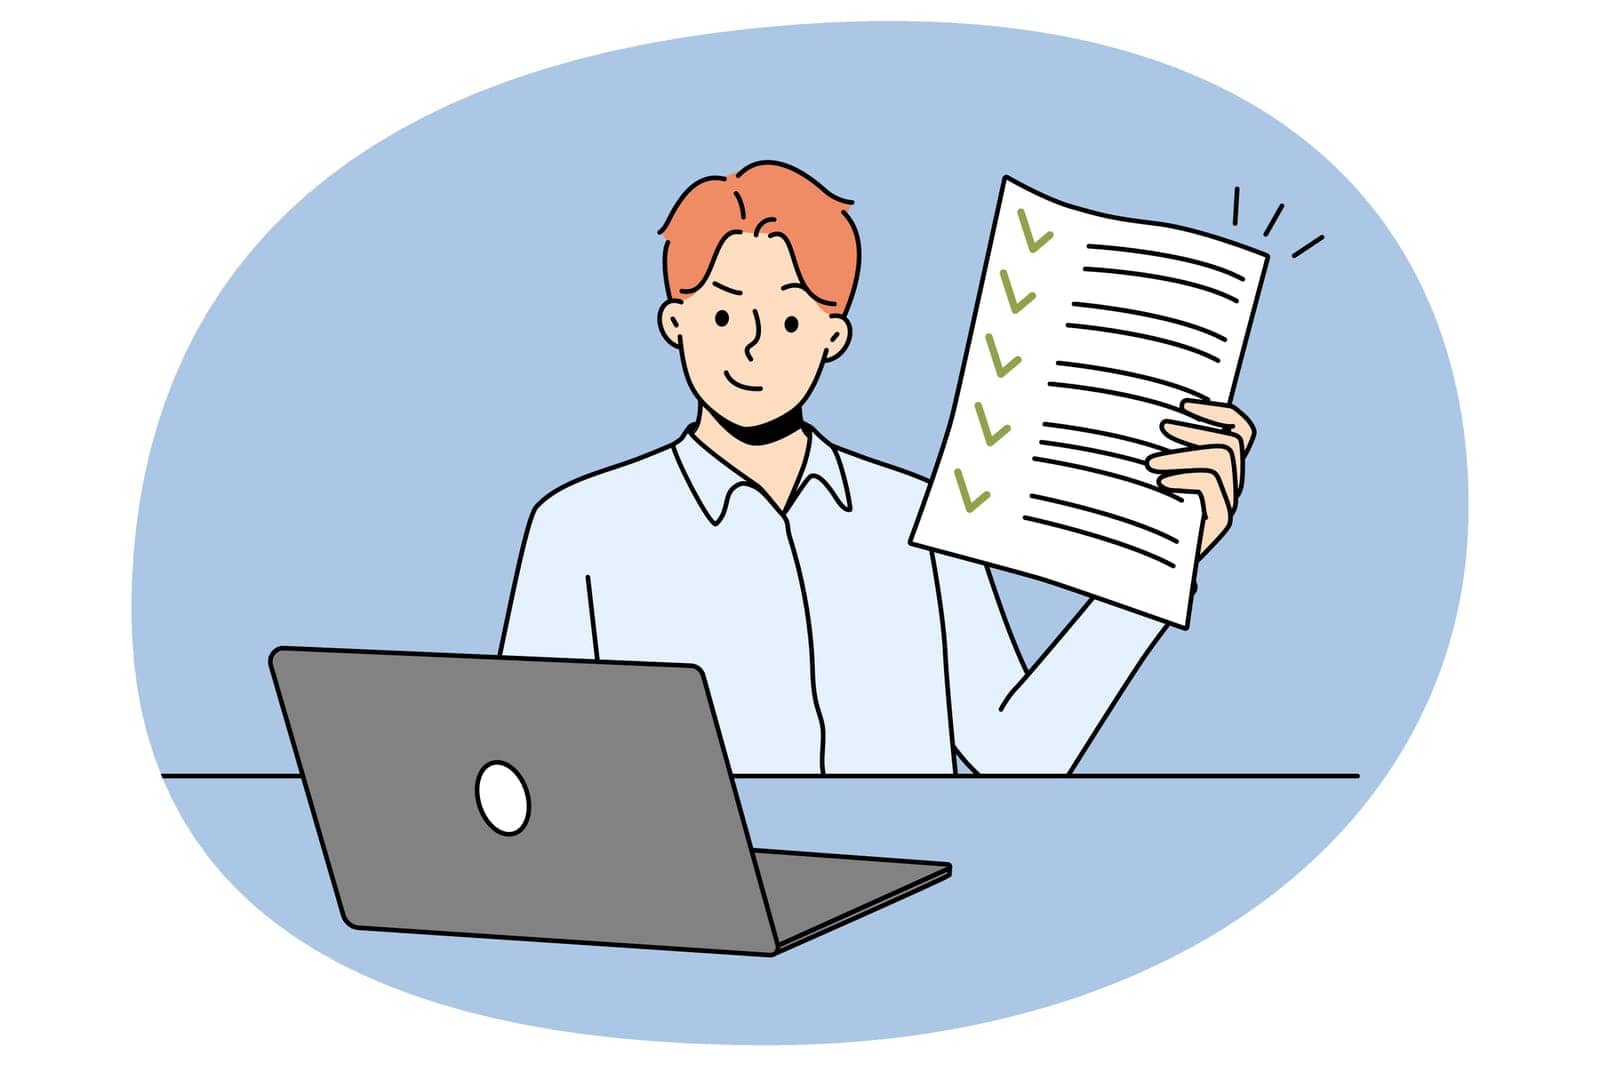 Happy man sitting at desk showing document with all tasks completed. Smiling businessman demonstrate filled form. Success and time management. Vector illustration.